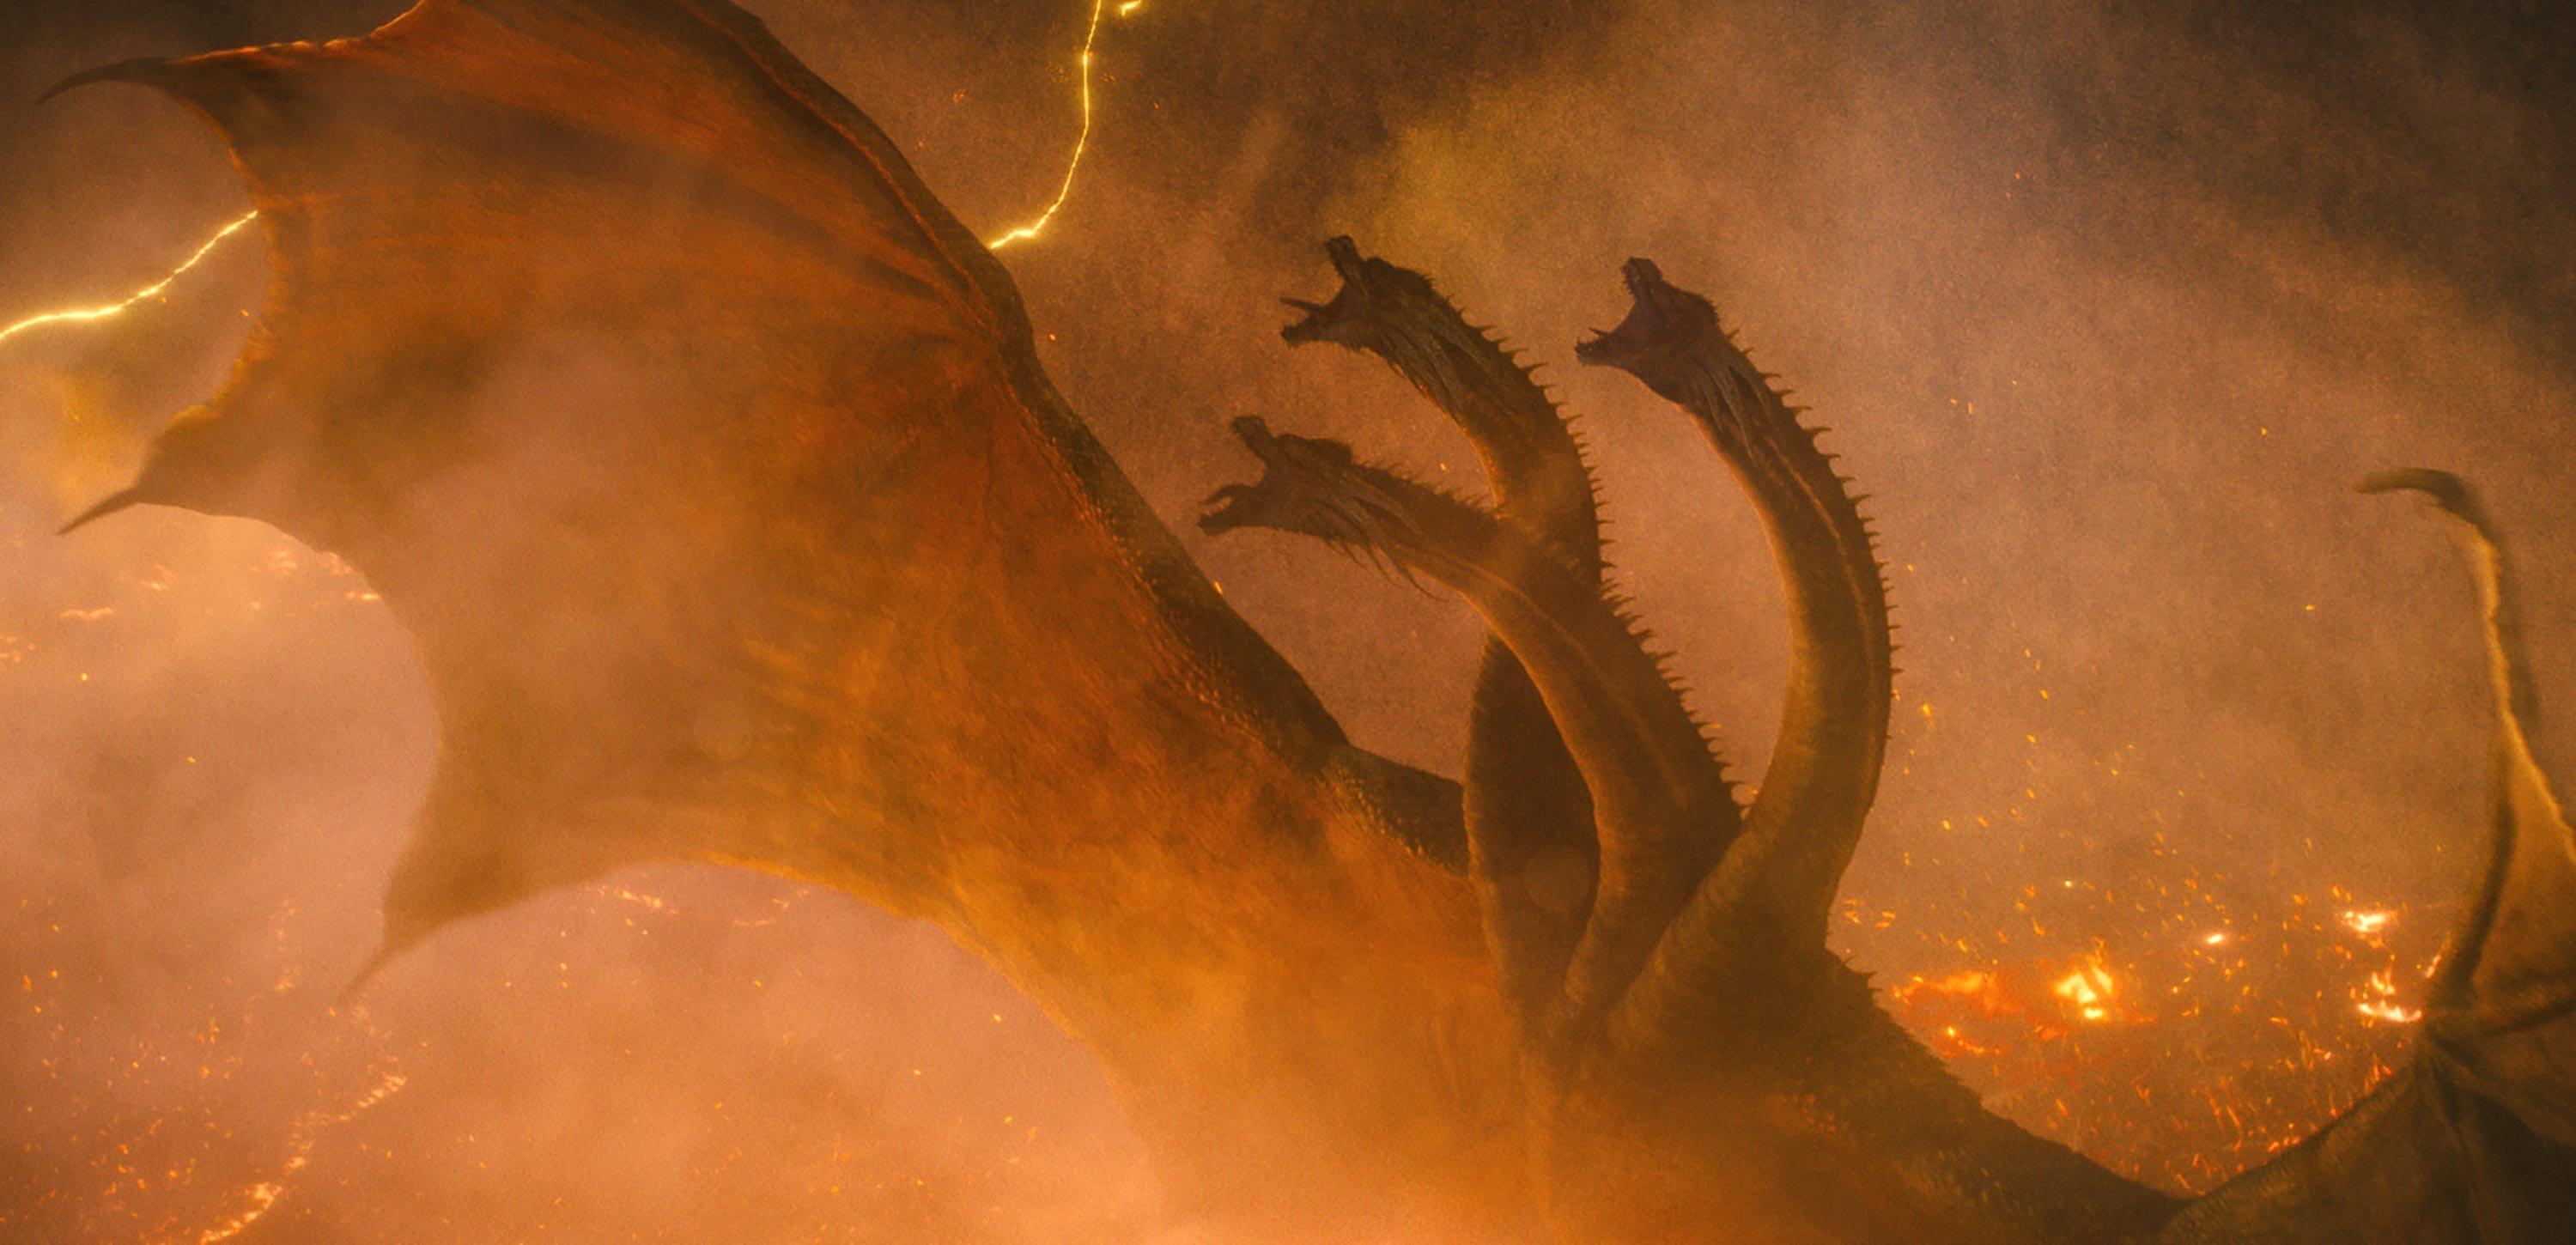 Godzilla: King of the Monsters heavy King Ghidorah is a very human